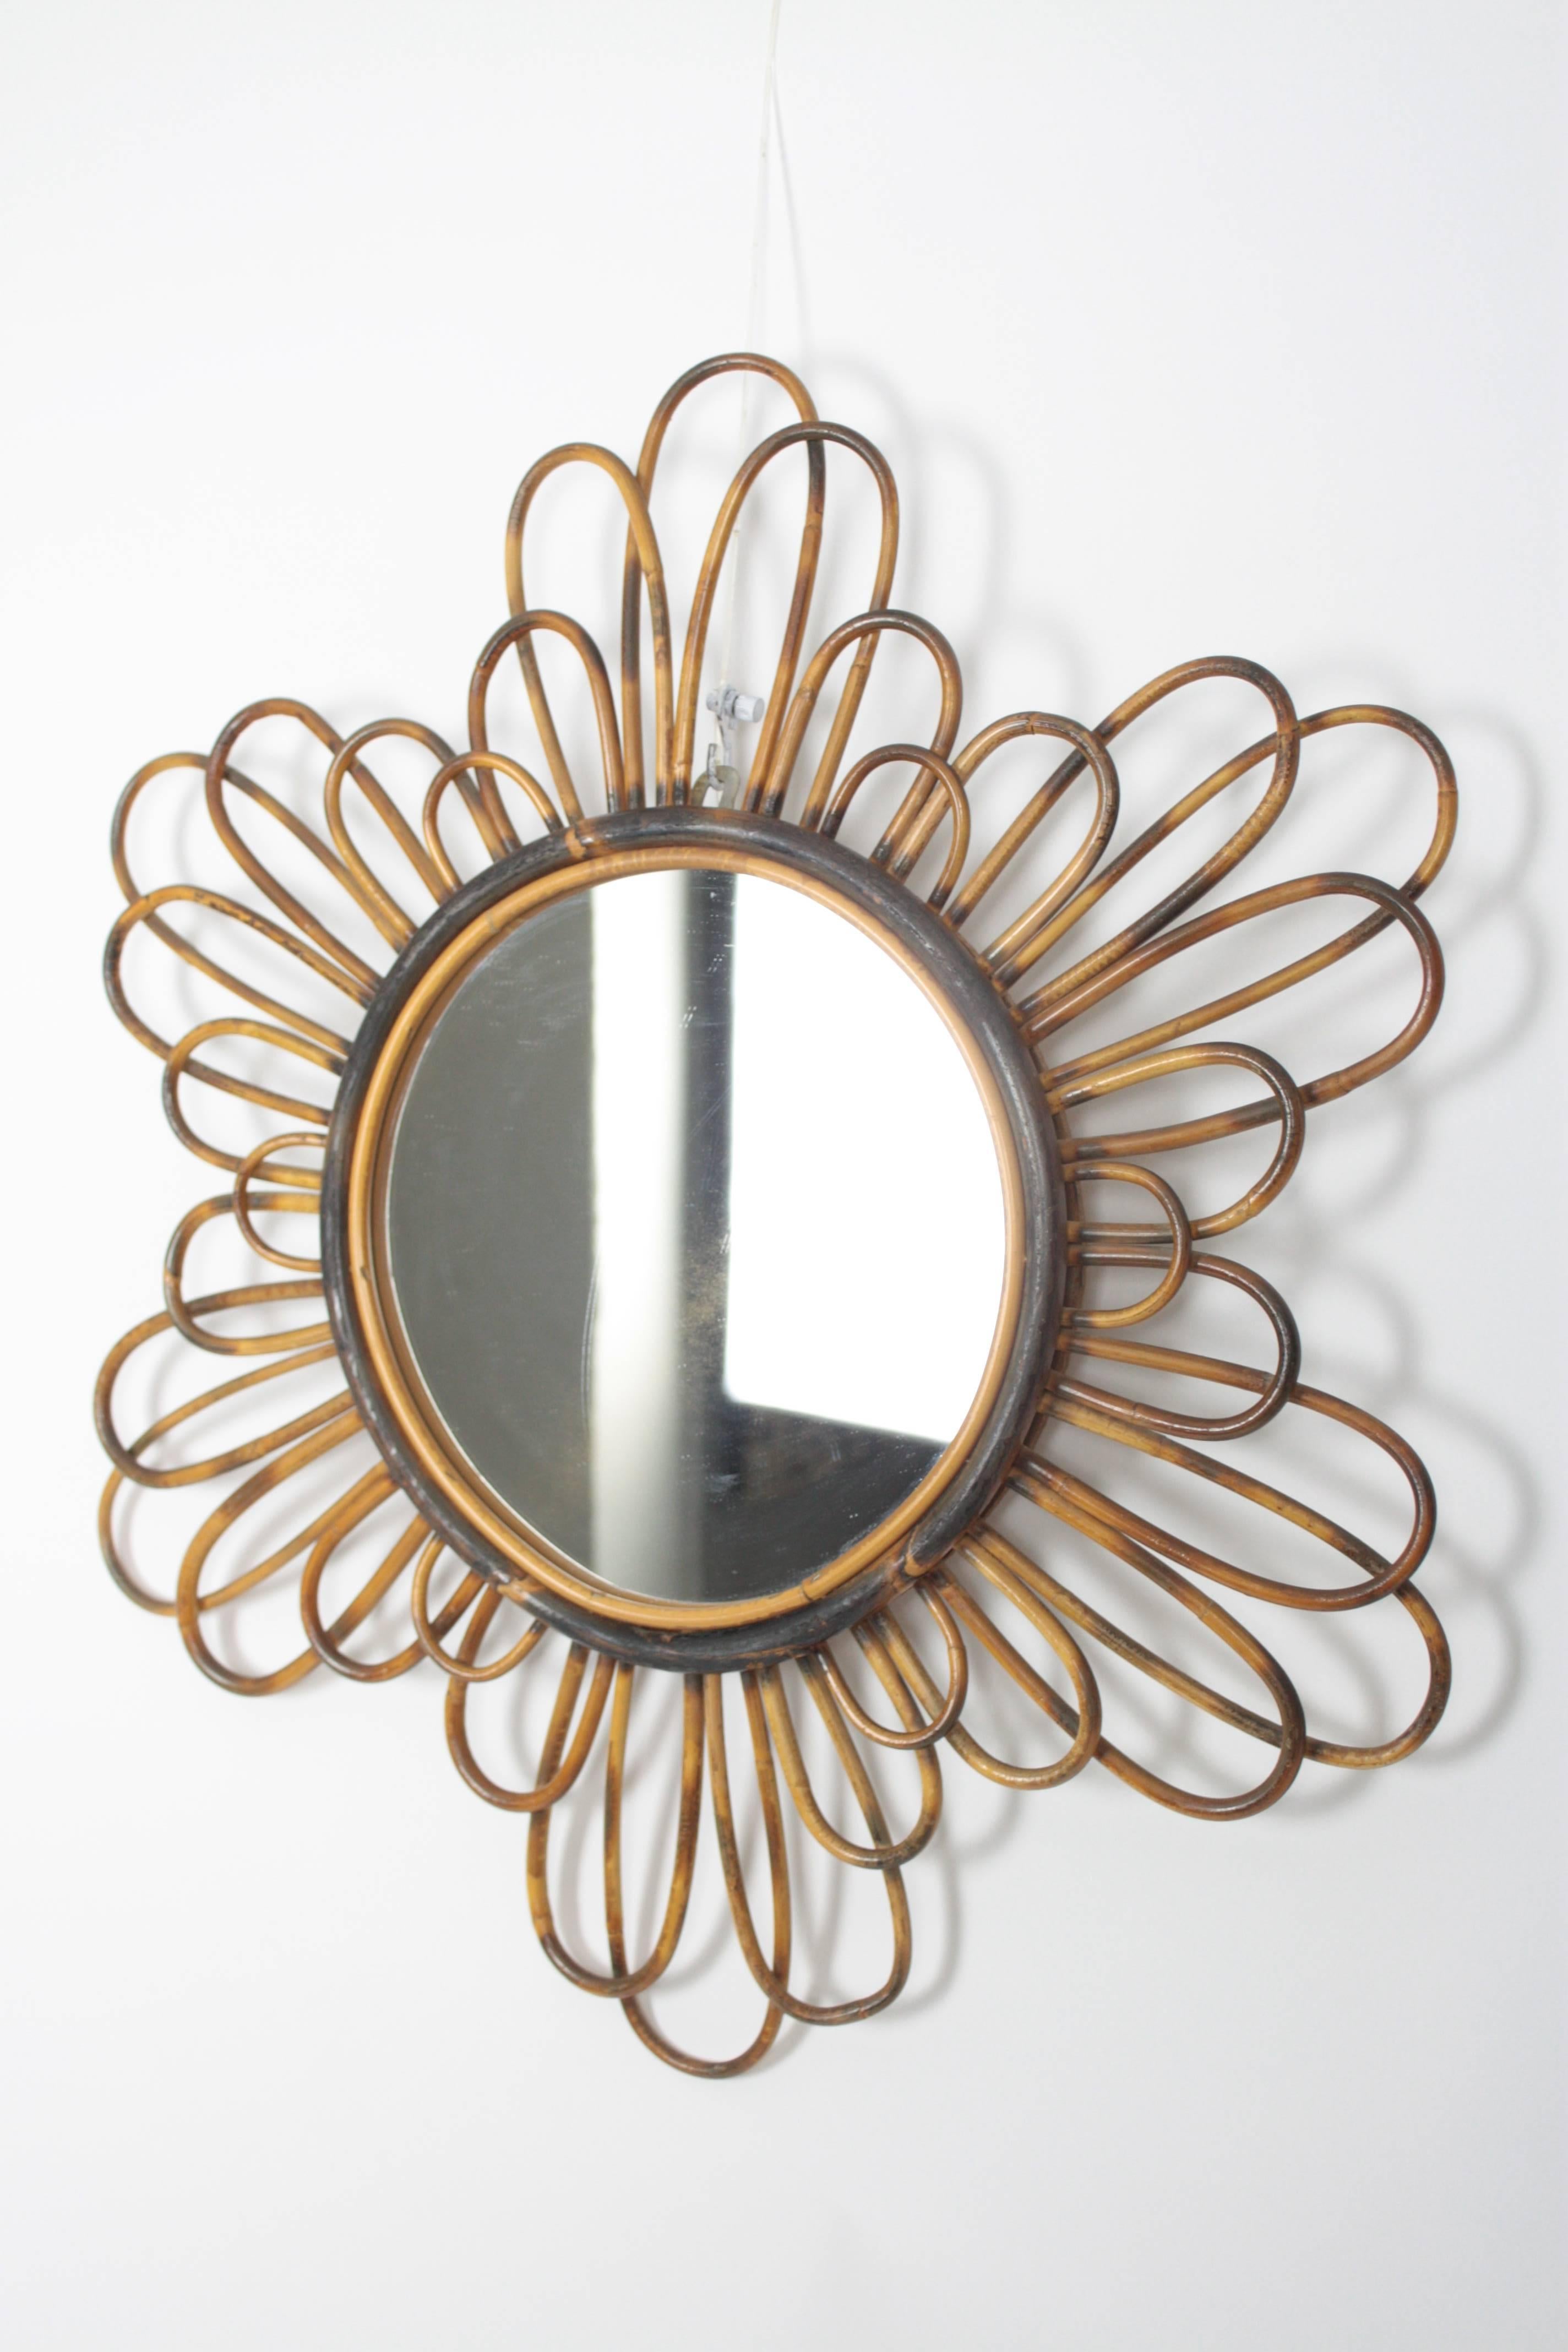 Lovely French riviera flower burst mirror handcrafted in bamboo or rattan and decorated with pyrography accents, 
France, 1960s.

Beautiful piece to place it alone or creating a fresh and Mediterranean wall decoration with other bamboo and rattan